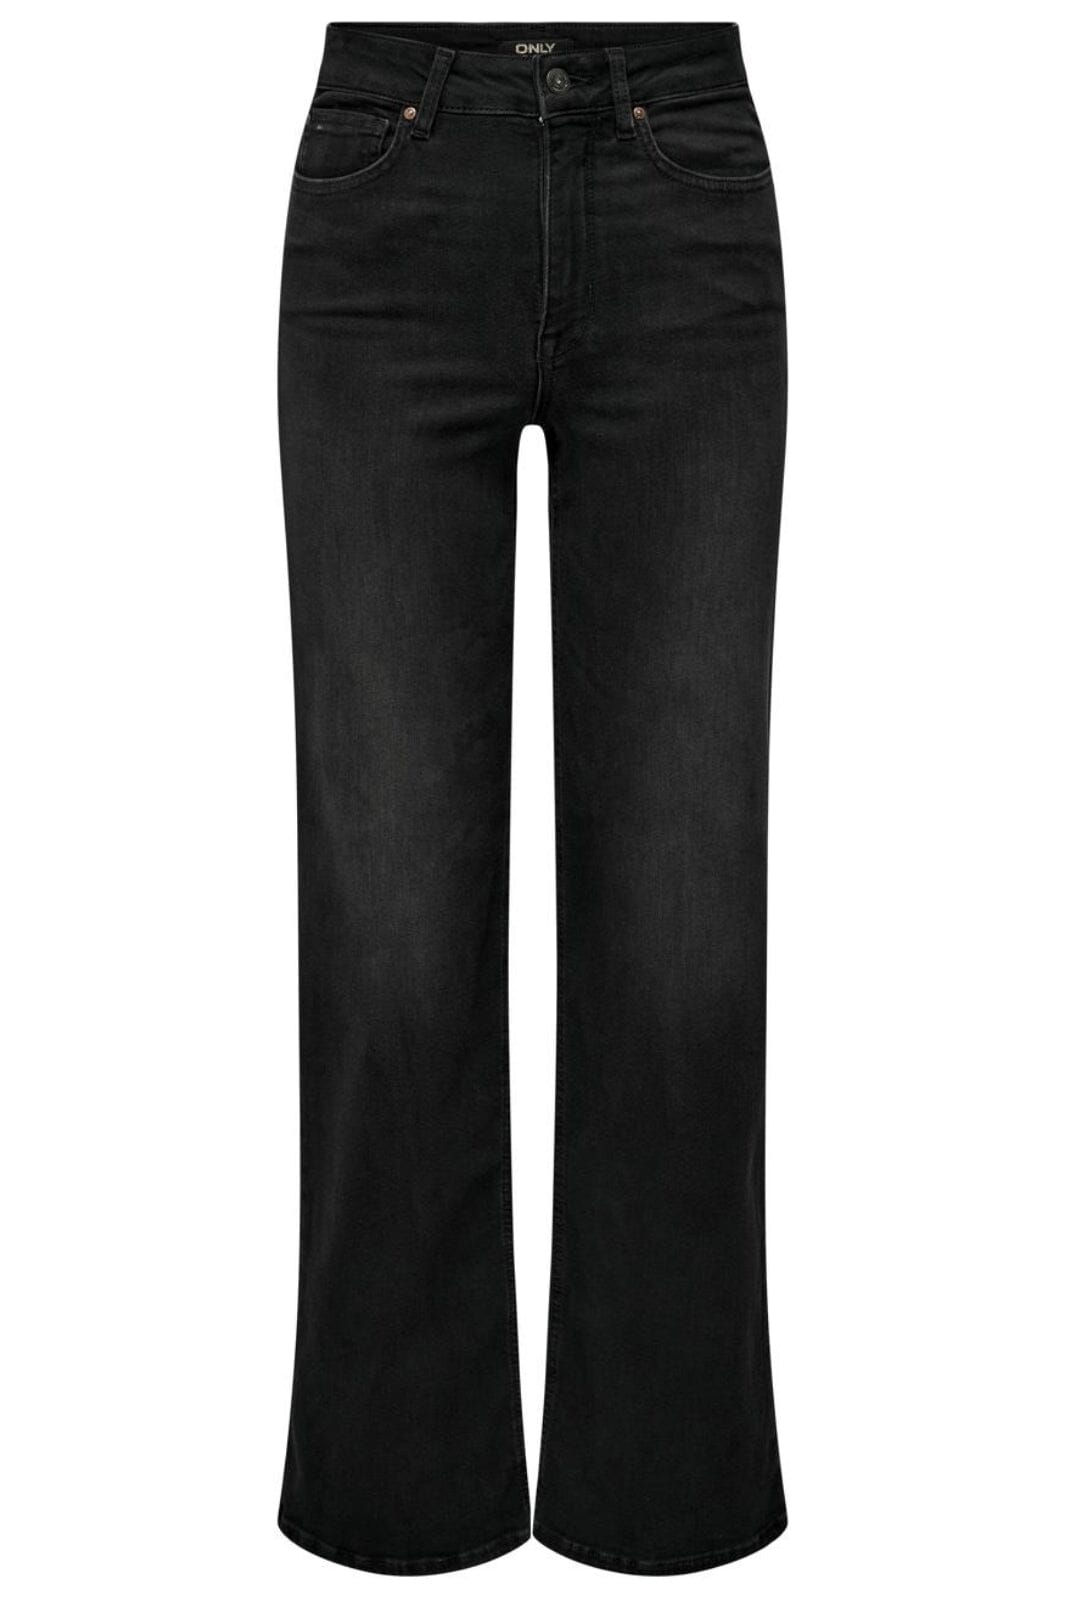 Only - Onlmadison Blush Wide Cro099 - 4283326 Washed Black Jeans 